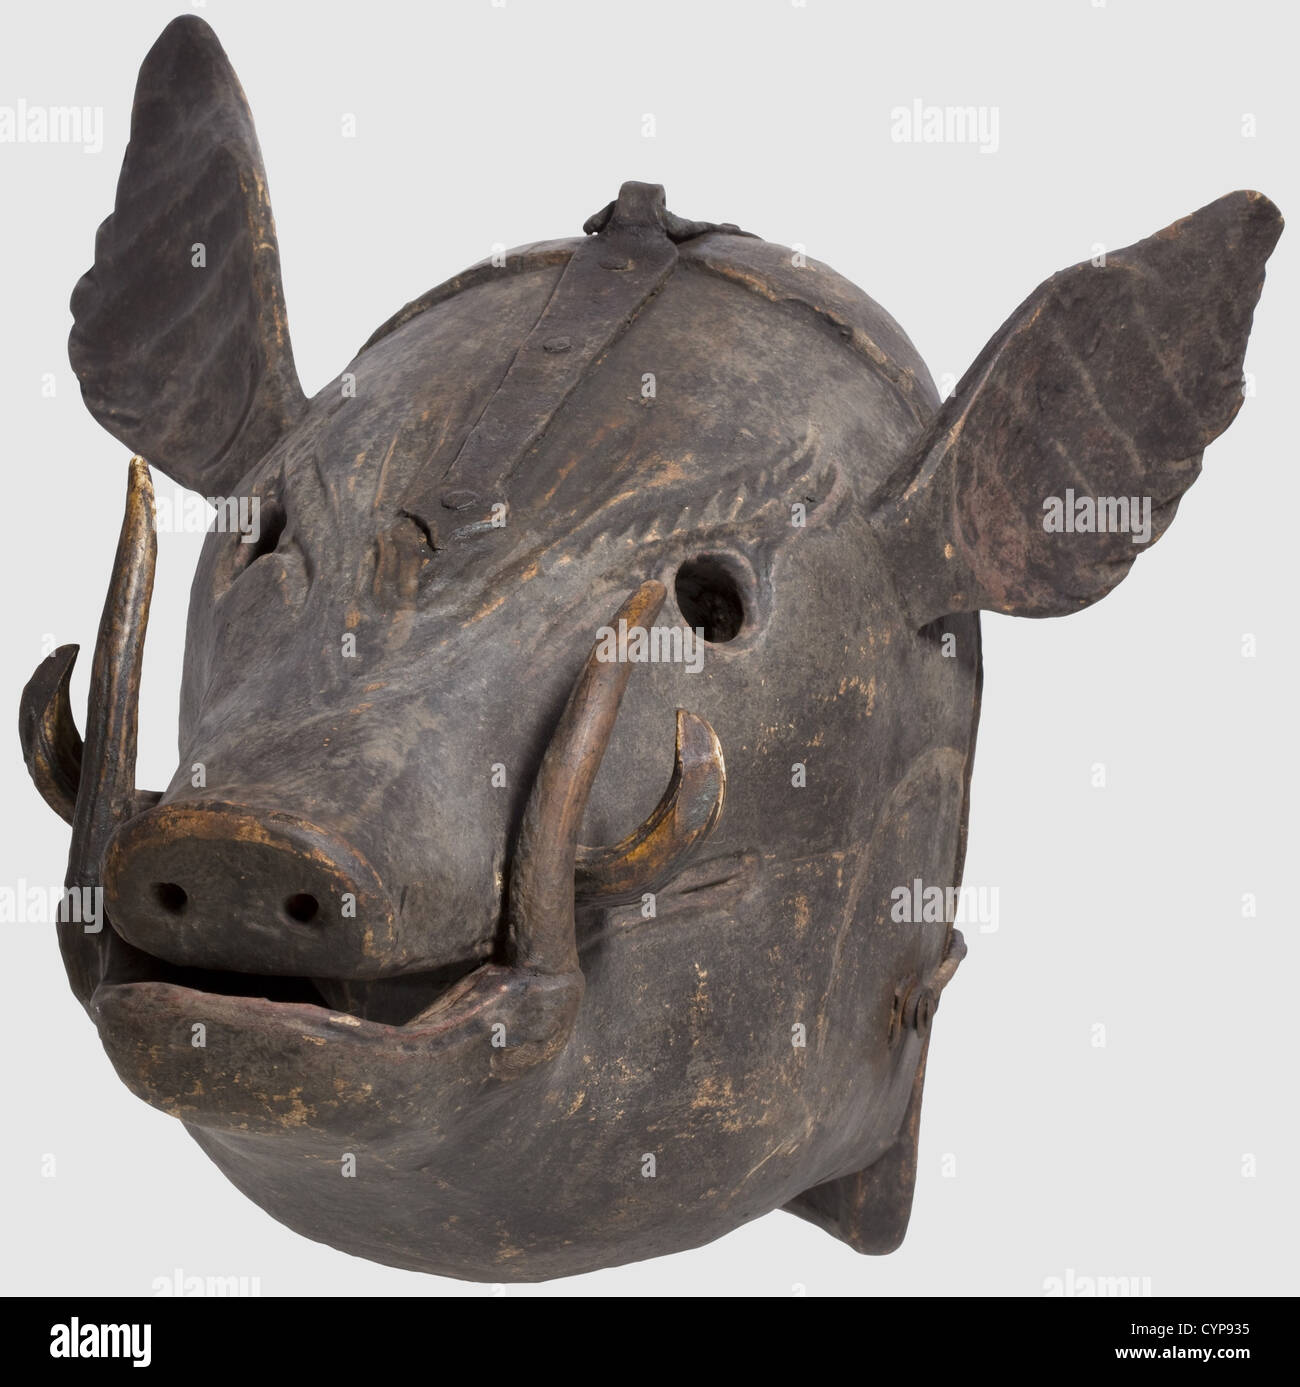 A German mask of shame,17th/18th century. Carved wooden mask in the shape of a boar's head with inserted boar's teeth,the fangs made of stag horn,with attached flaring ears. The front and back piece connected at the crown by a wrought iron hinge and with a locking hook on the side. Dark,slightly worn paint. Length 48 cm,width 40 cm. Regarding material and design a rather unusual mask of shame,probably alluding to the delinquent's 'brutish' behaviour,historic,historical,,18th century,17th century,instrument of torture,torture device,instruments of t,Additional-Rights-Clearences-Not Available Stock Photo